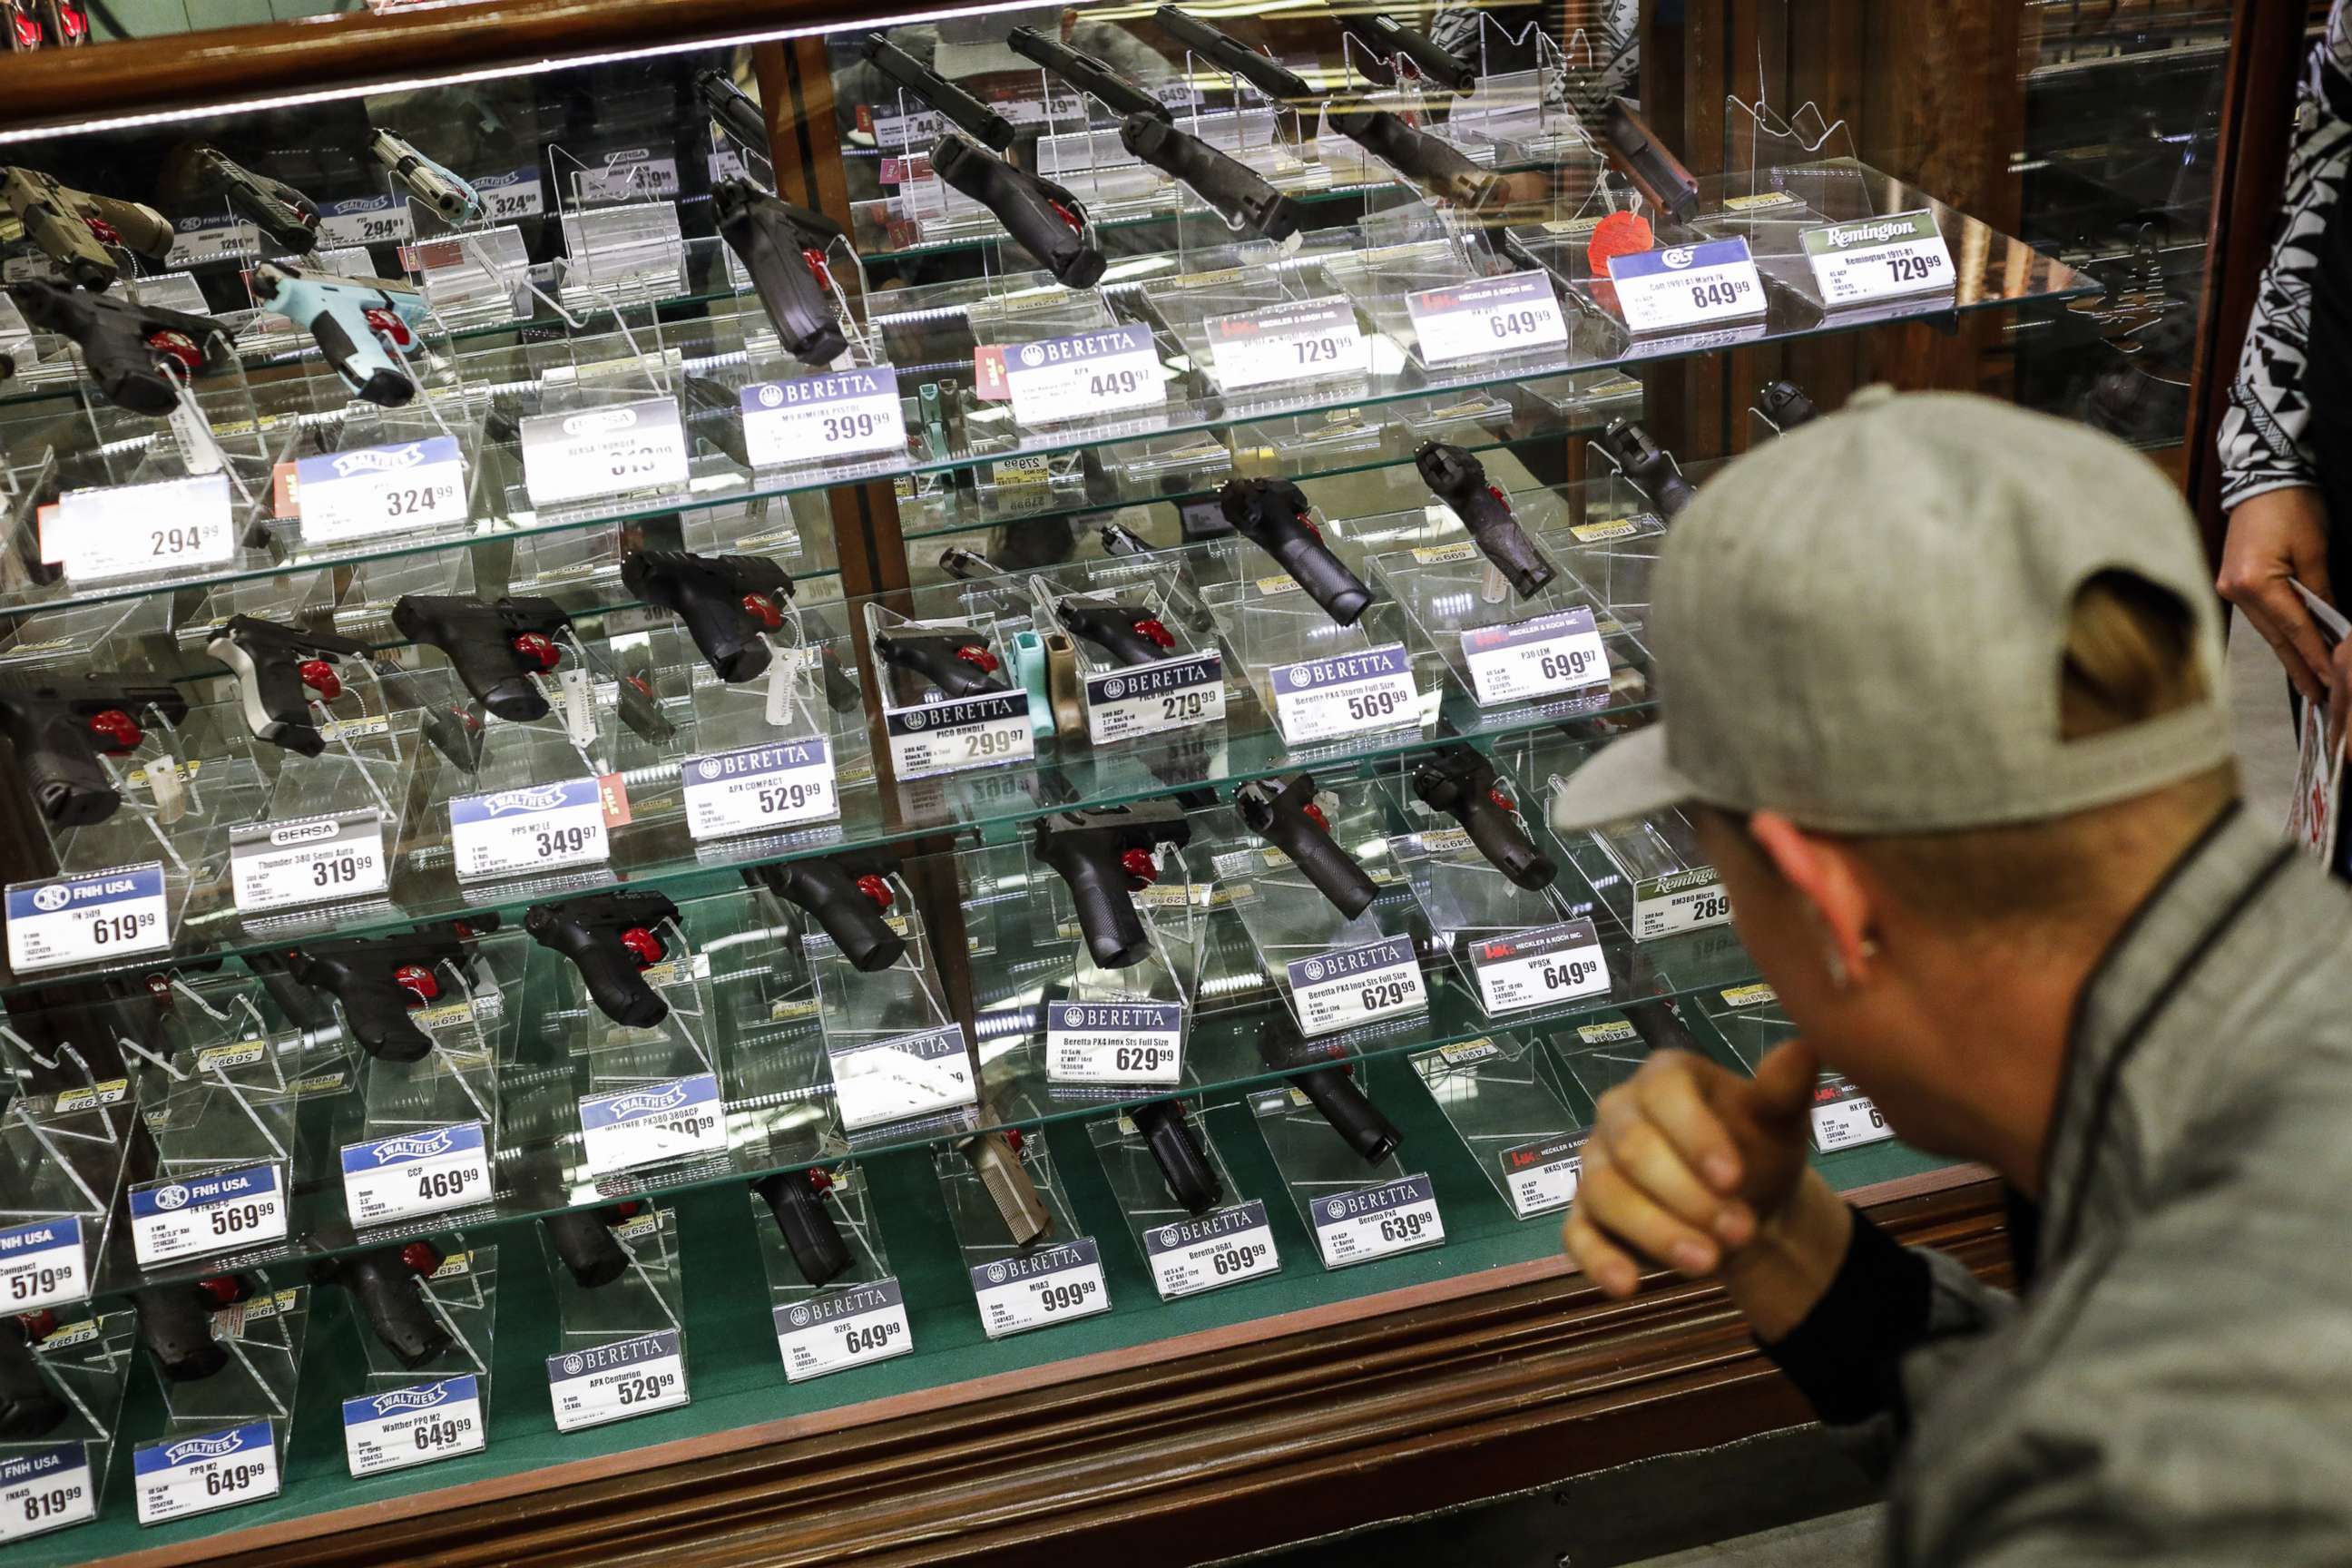 PHOTO: A shopper browses handheld firearms for sale inside a Bass Pro Outdoor World LLC store on Black Friday in Tampa, Fla., Nov. 23, 2018.